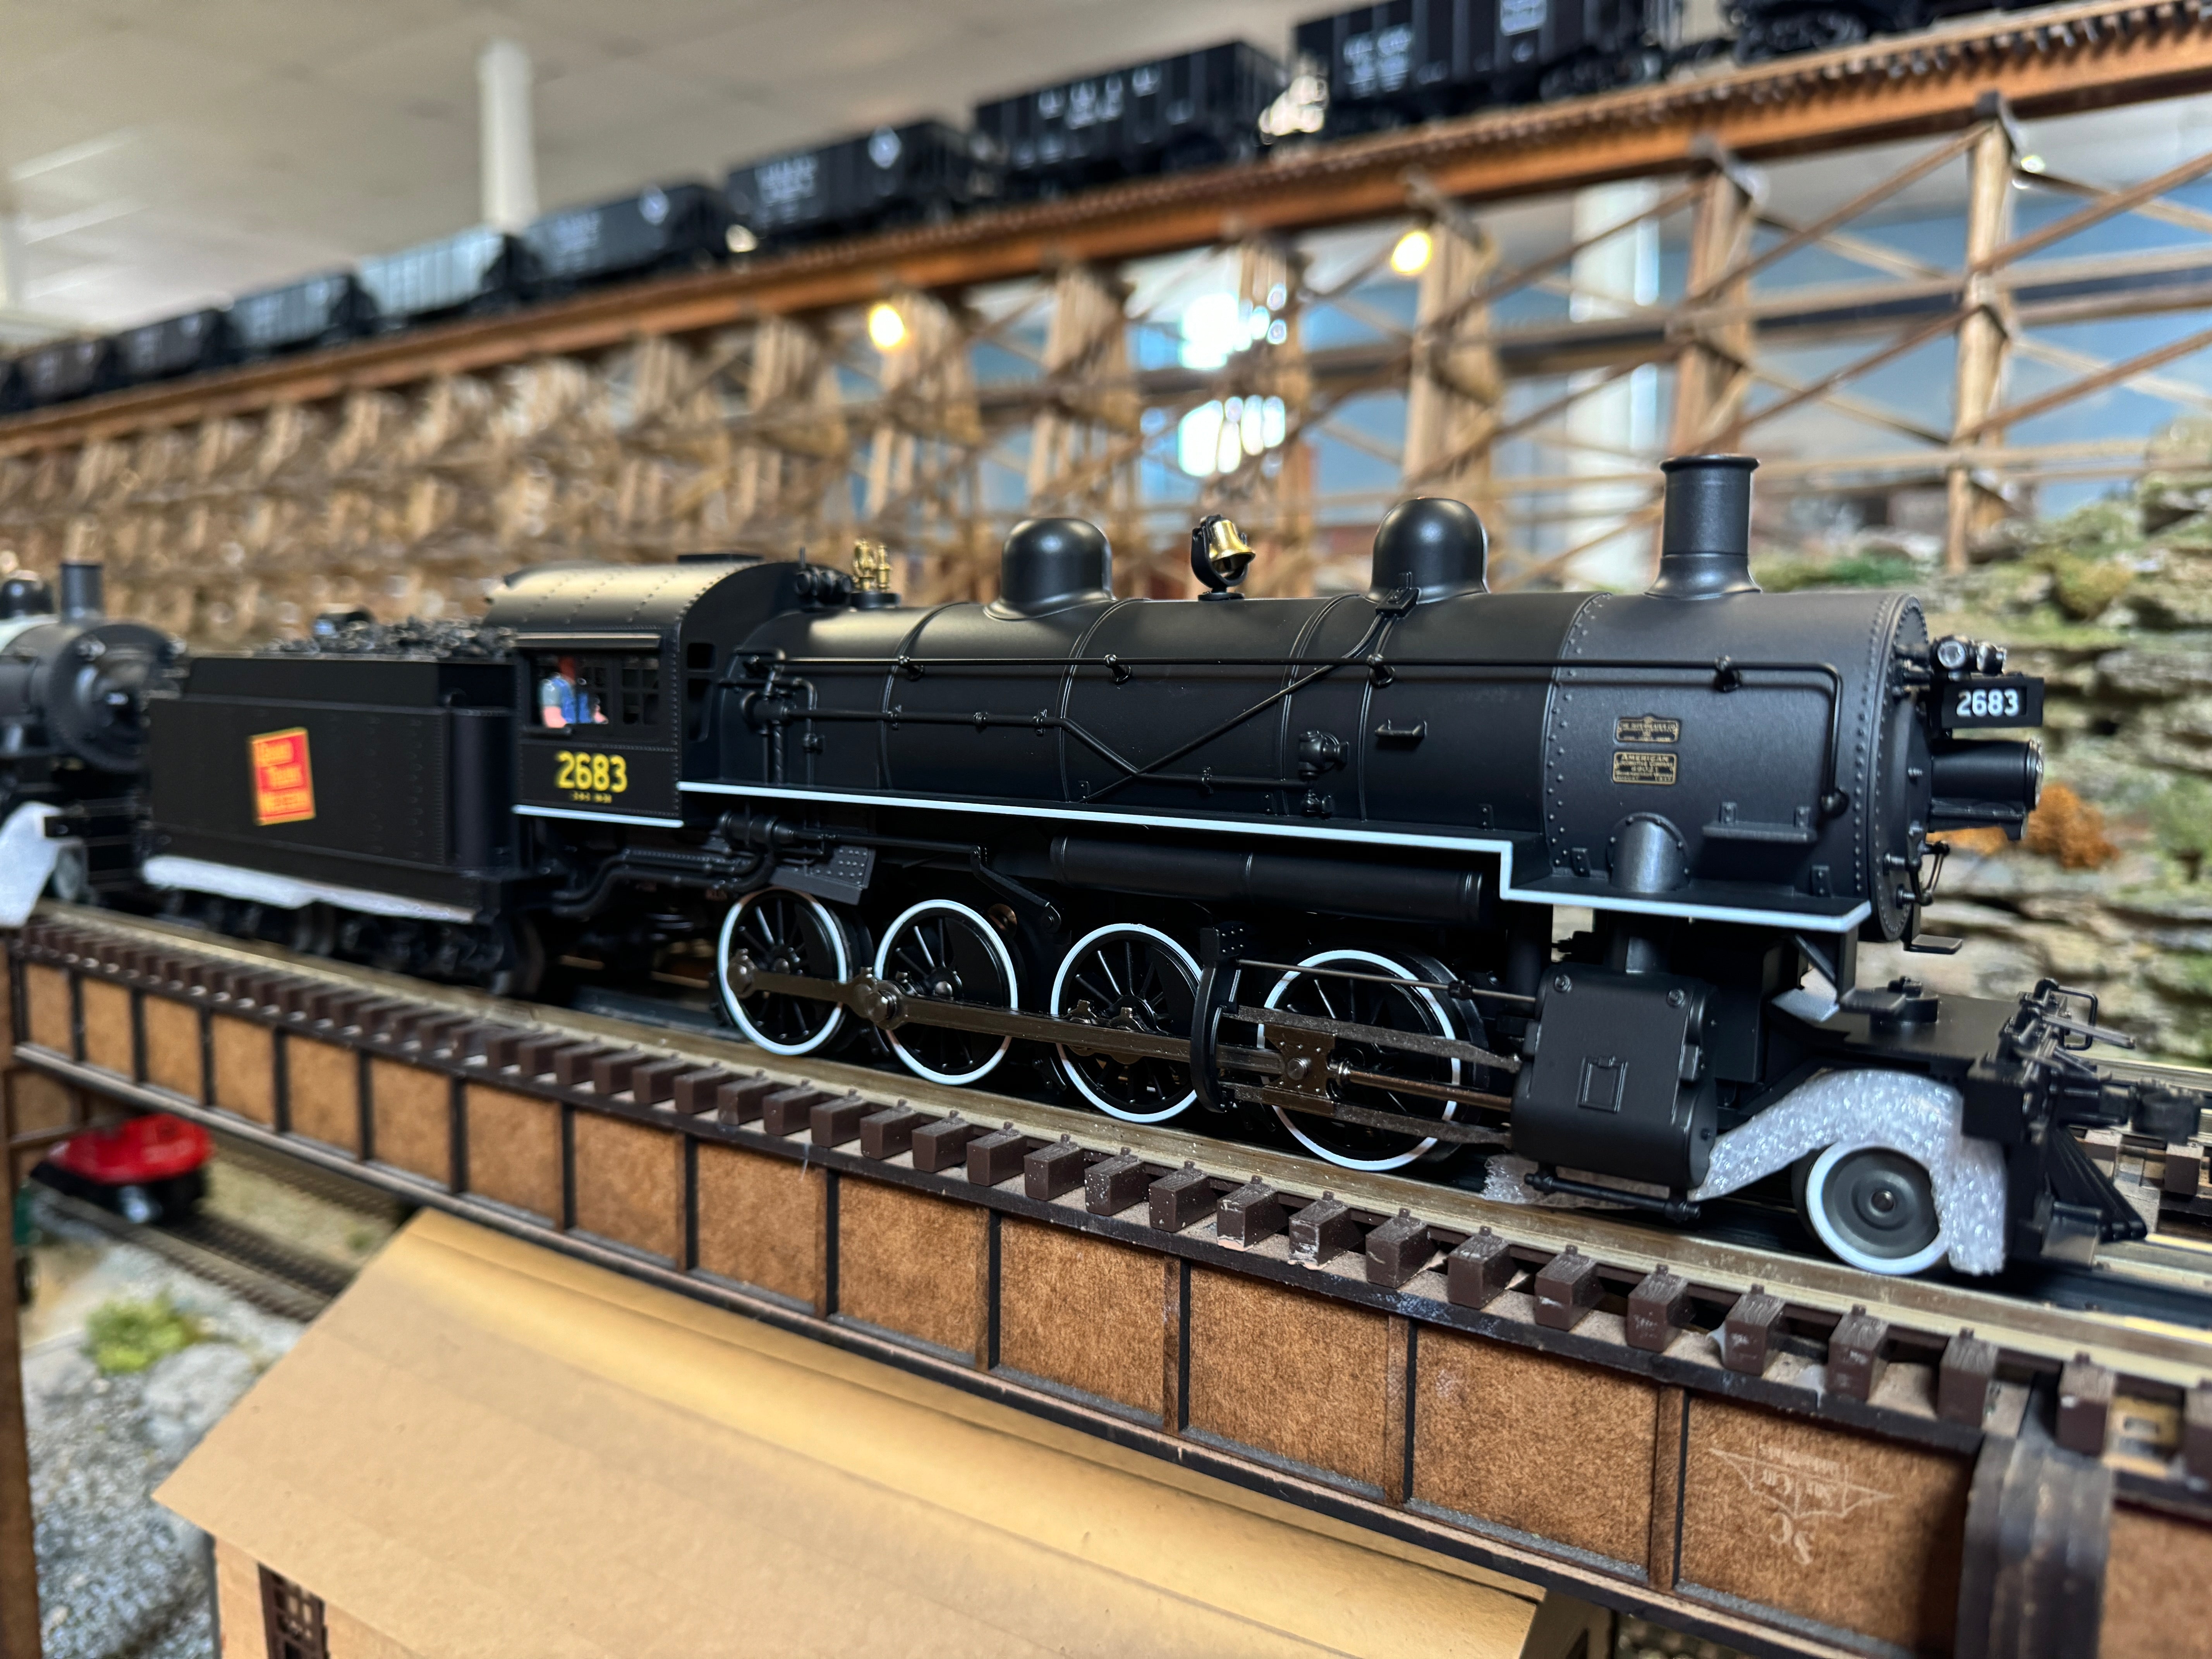 Lionel 2431370 - Legacy Consolidation Steam Engine "Grand Trunk Western" #2683